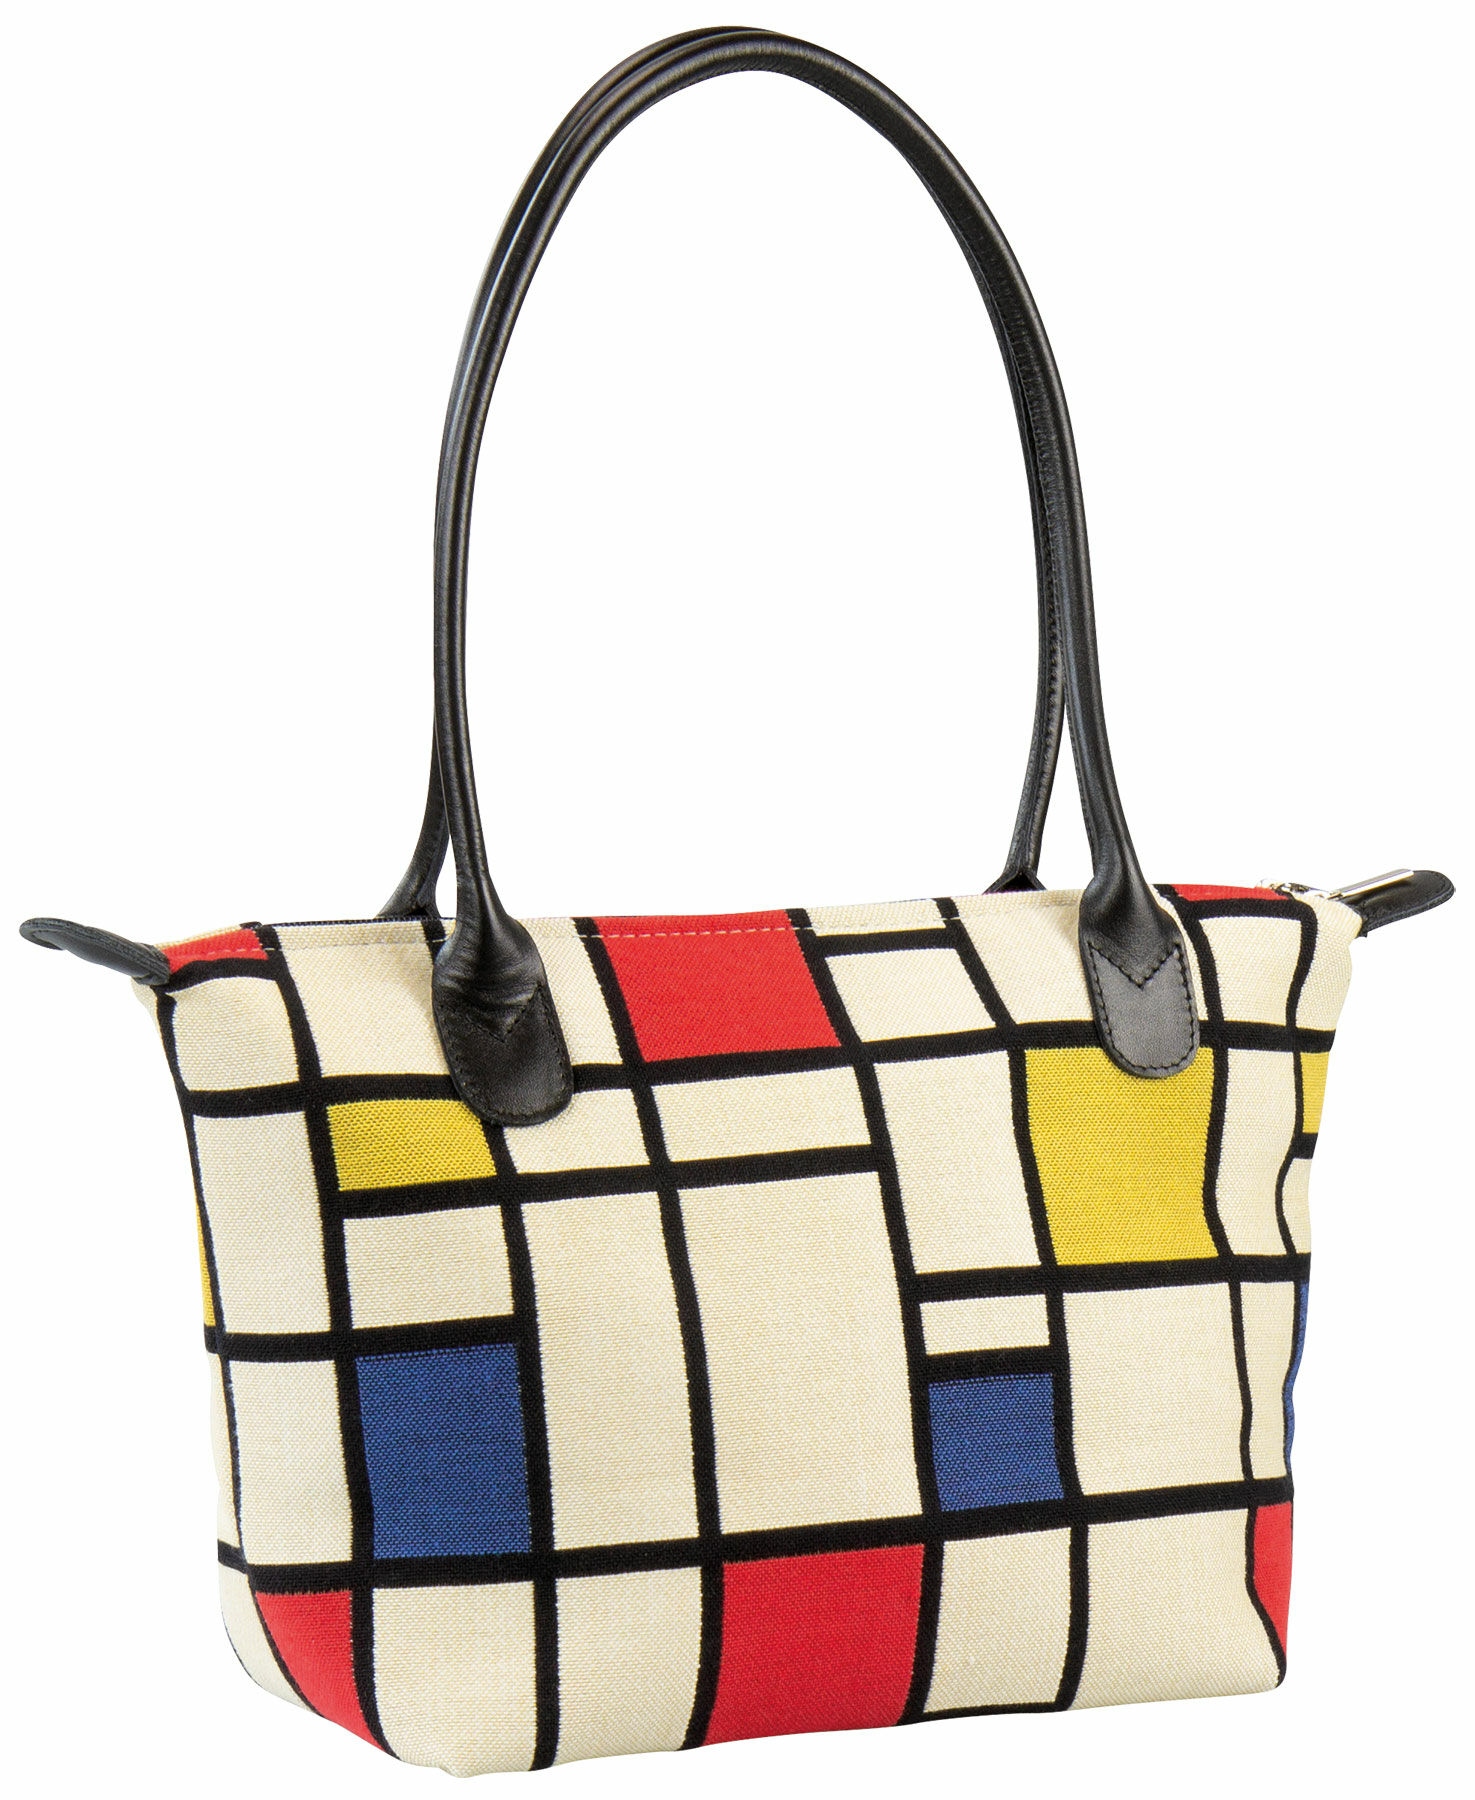 Handbag "Composition in Red, Blue and Yellow" by Piet Mondrian